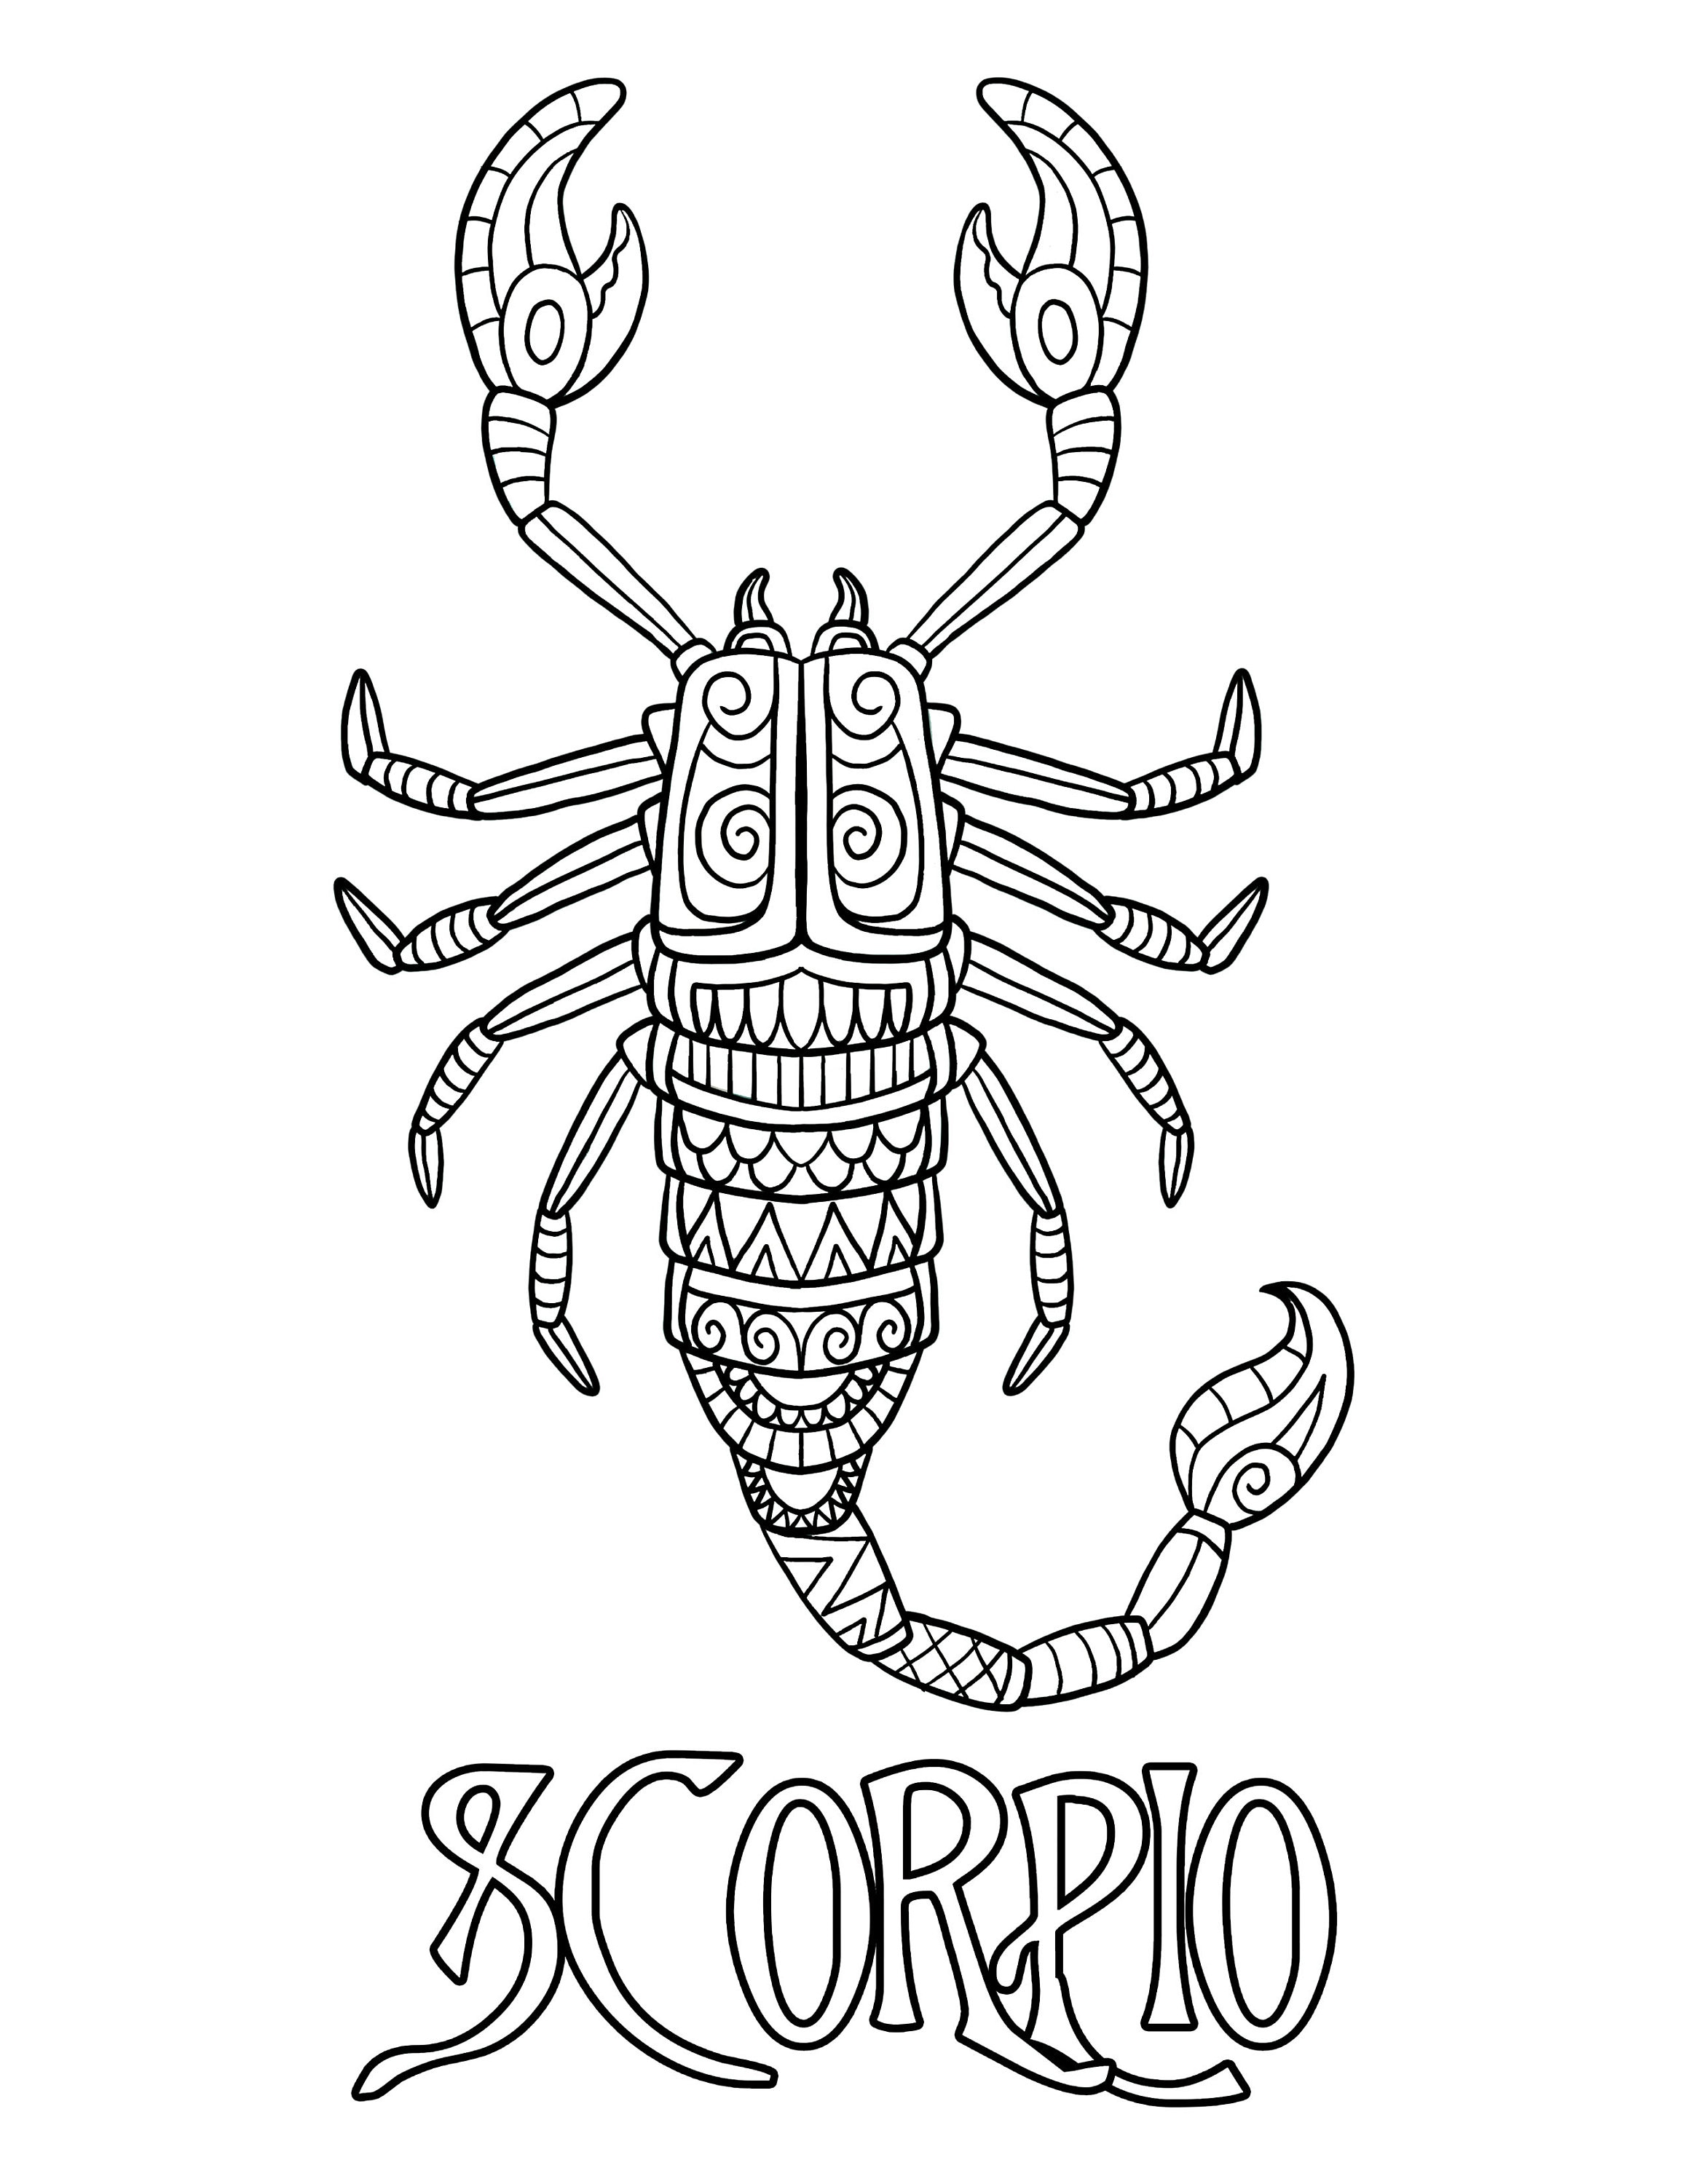 Scorpio coloring page digital download printable astrological sign scorpio zodiac sign pdf instant download